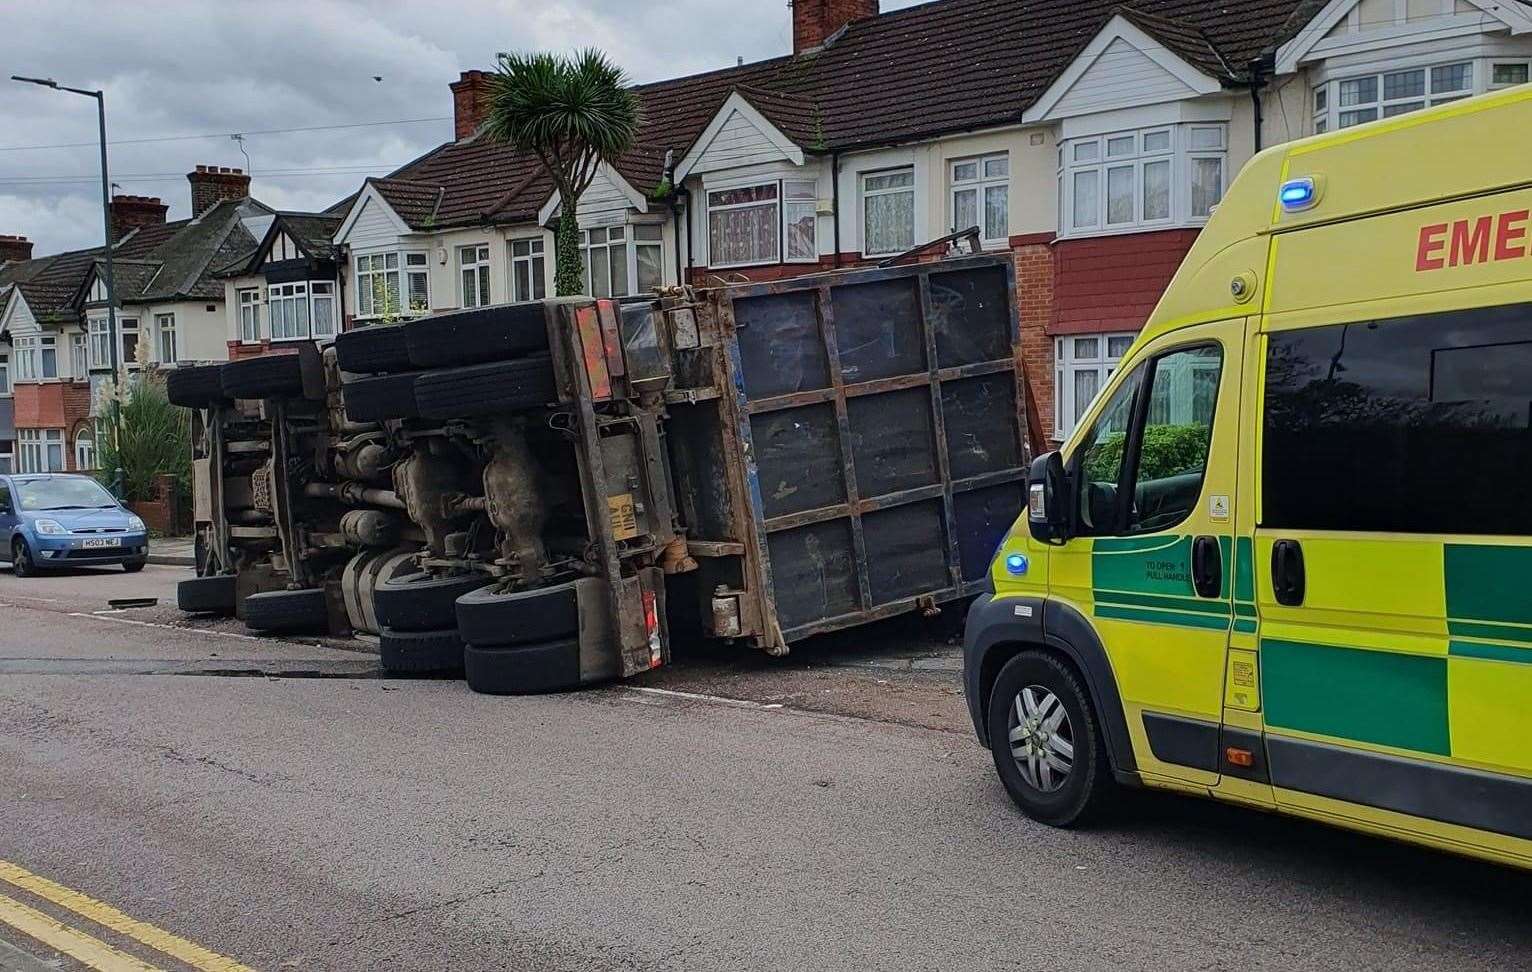 A man was killed after a lorry overturned in Strood. Picture: Clint Else